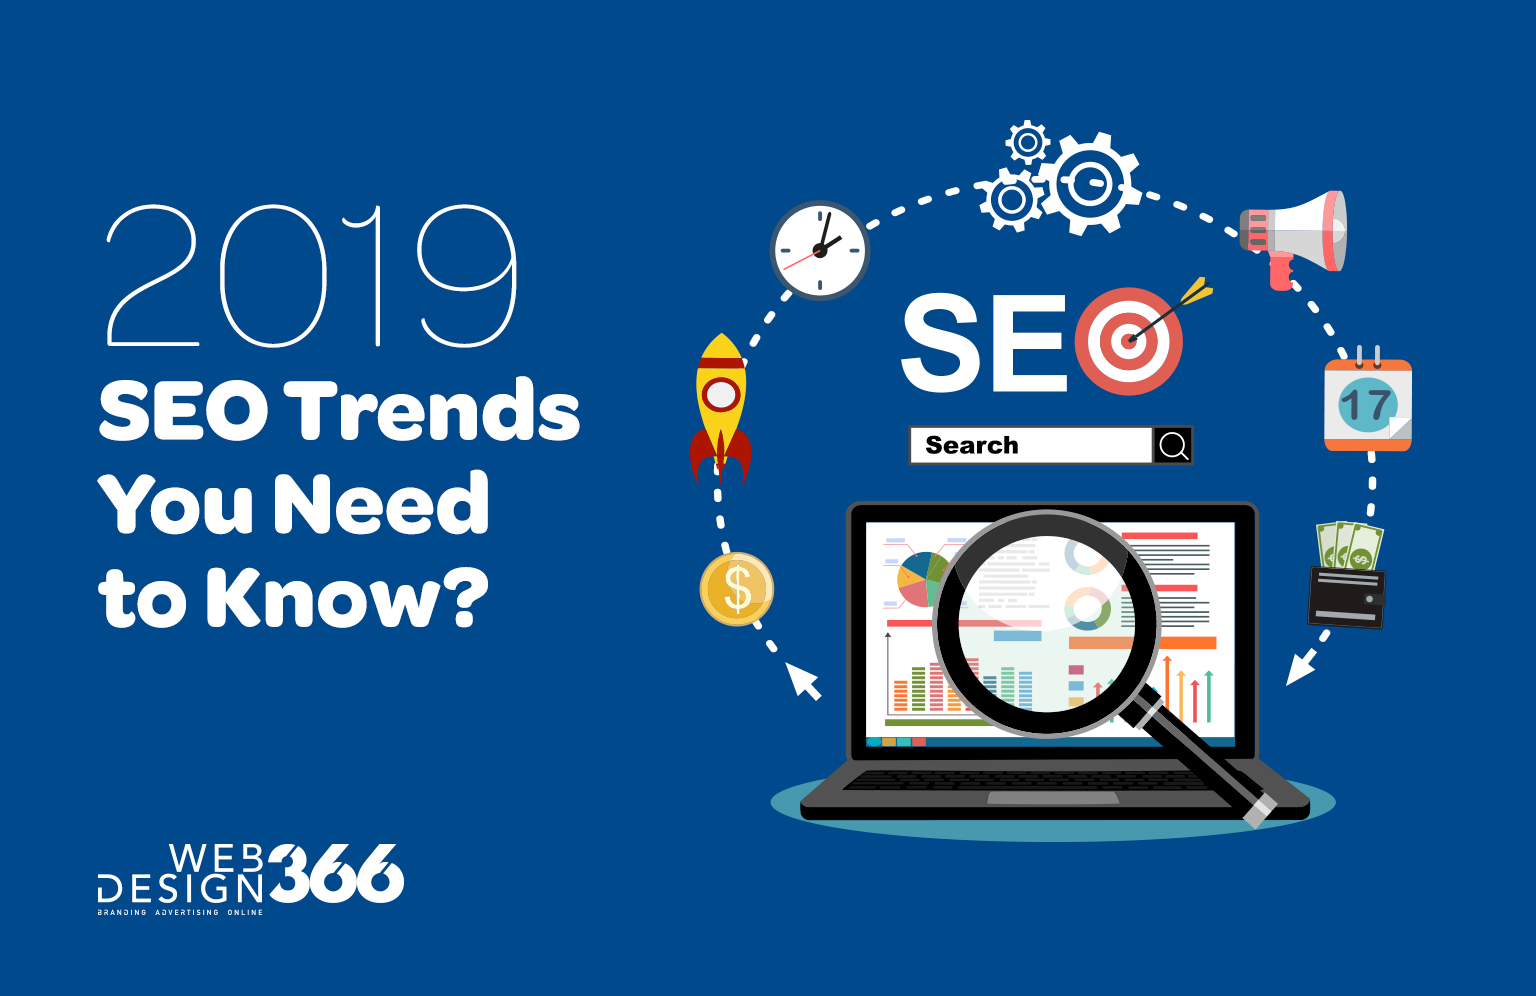 2019 SEO Trends You Need to Know